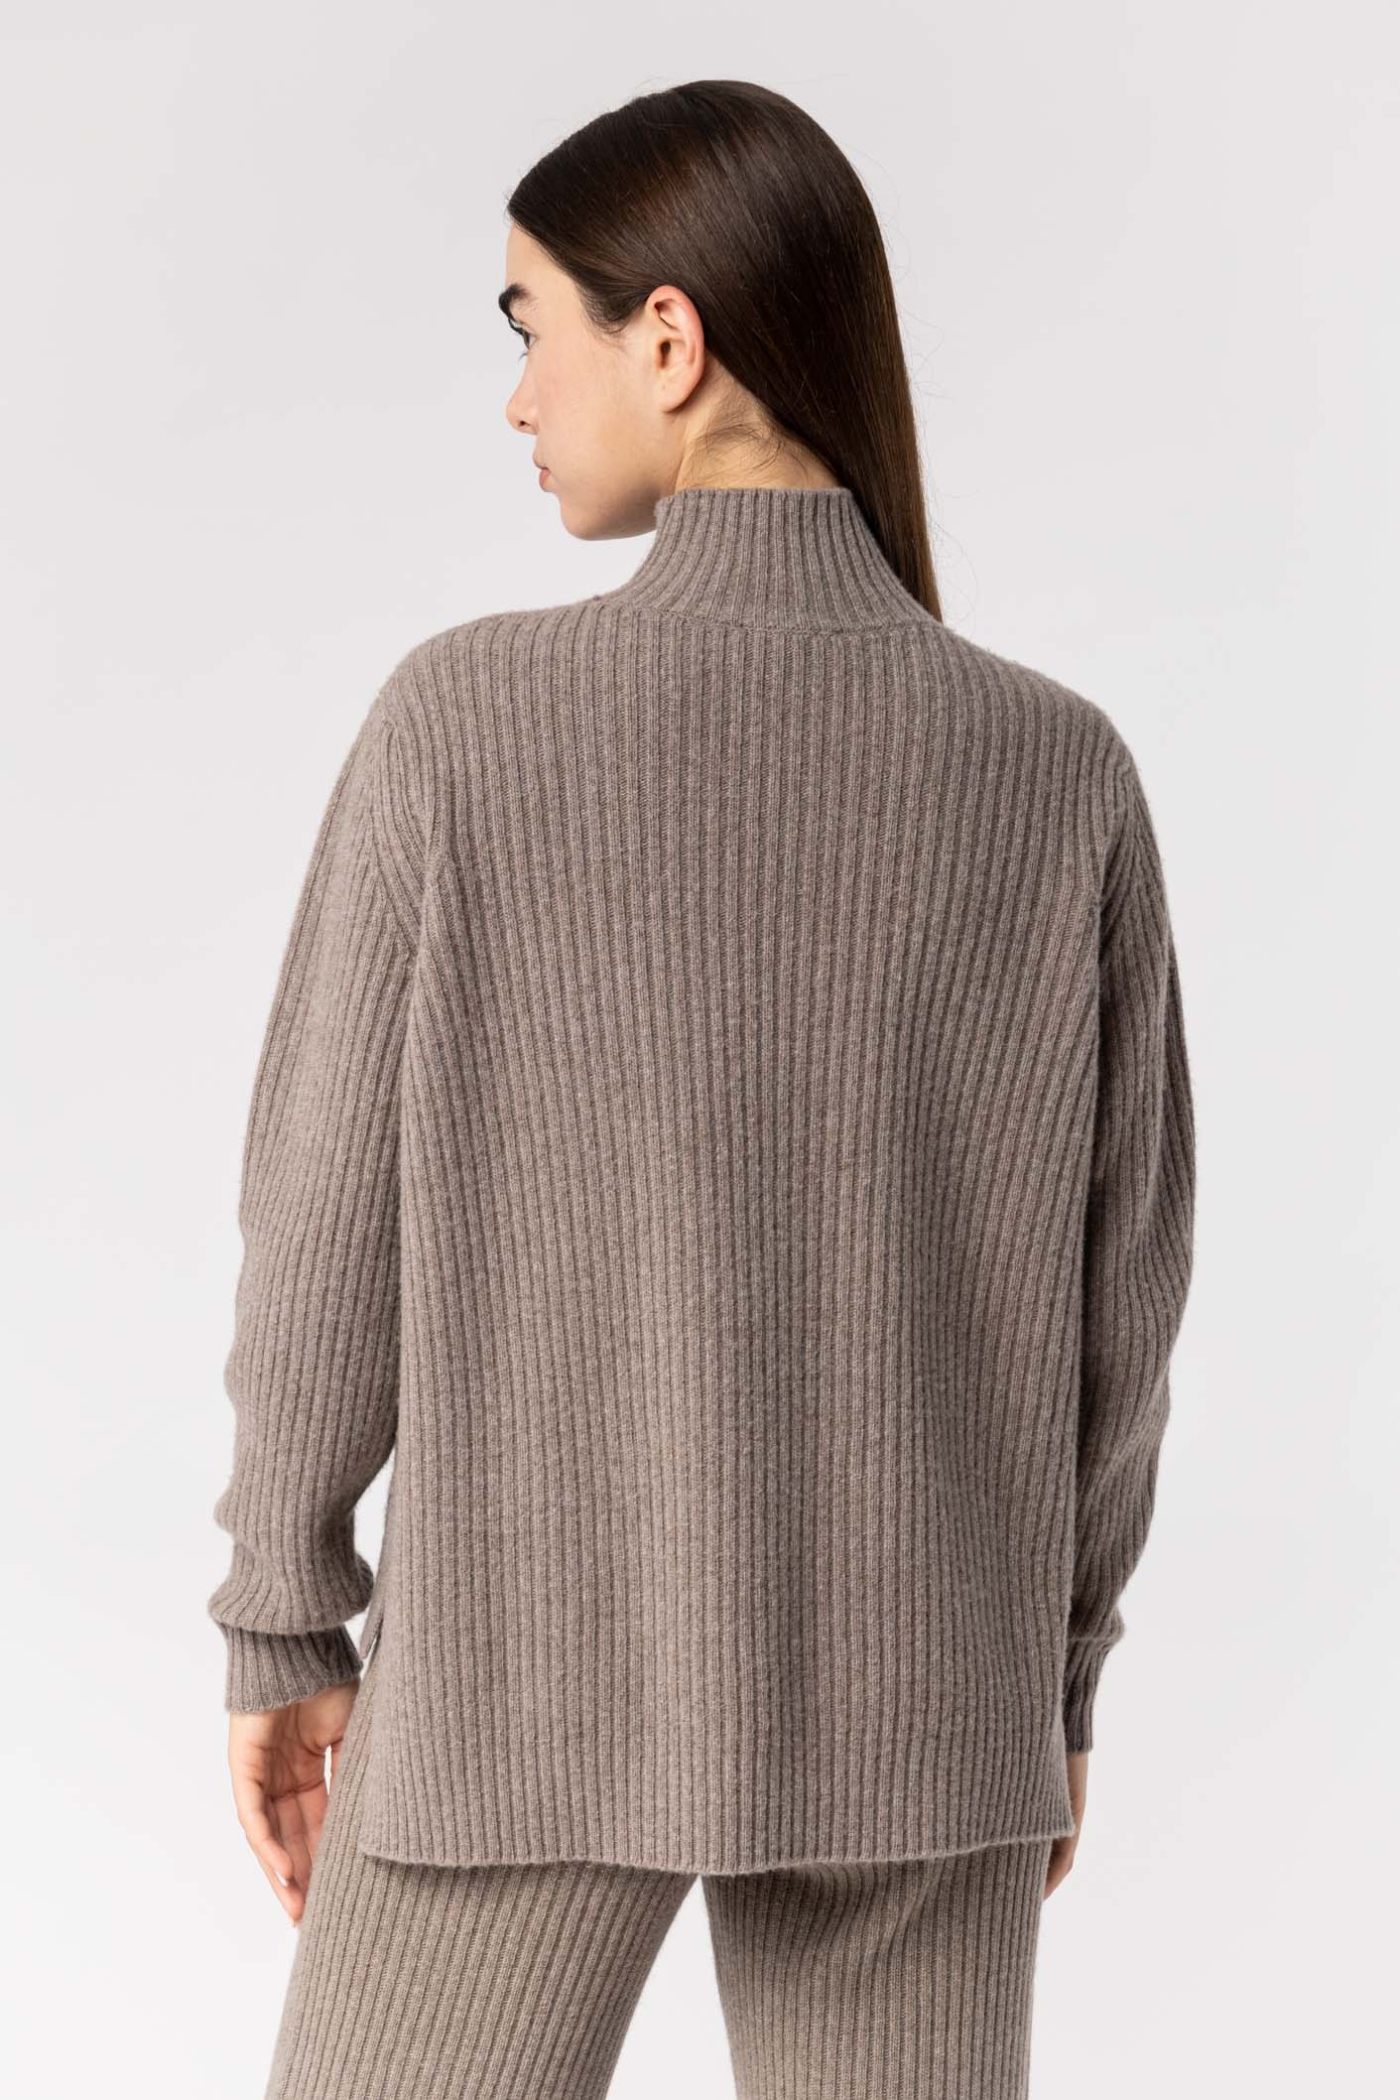 Wool Ribbed Mock Neck Sweater